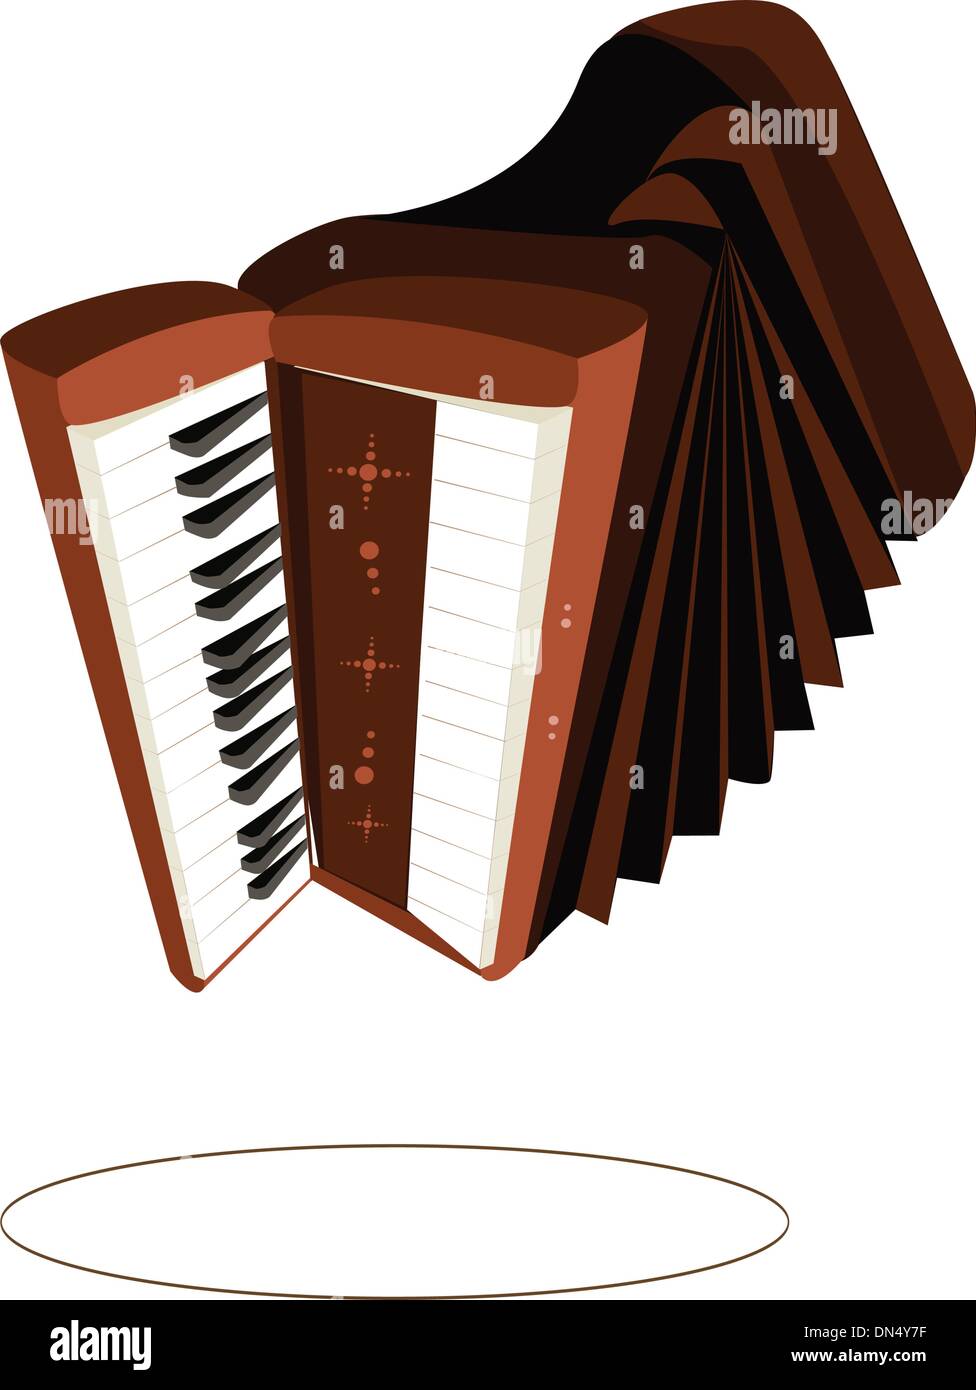 Accordion band Stock Vector Images - Alamy